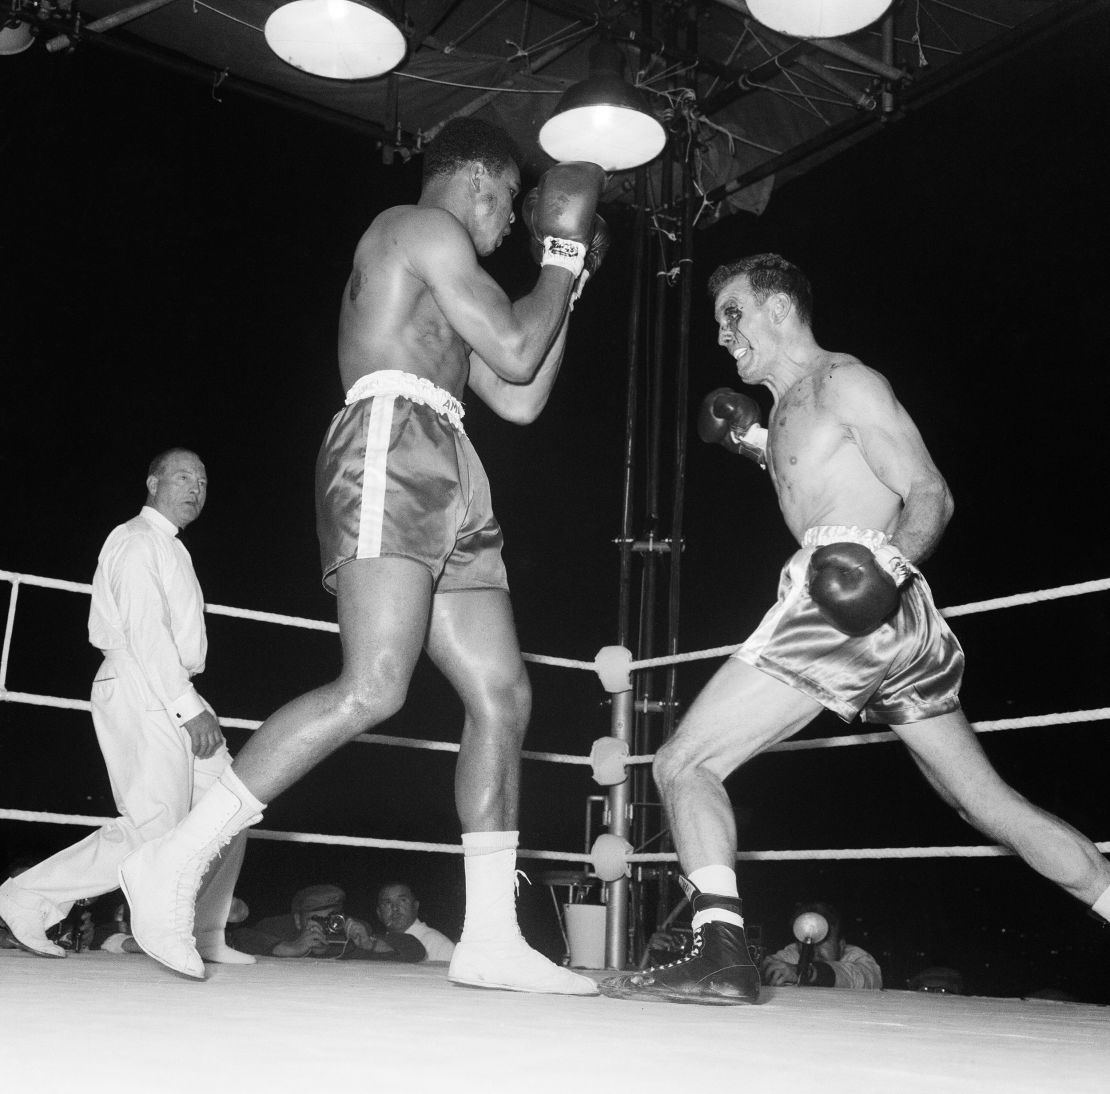 Cassius Clay fights Henry Cooper at Wembley Stadium, London on June 18, 1963.